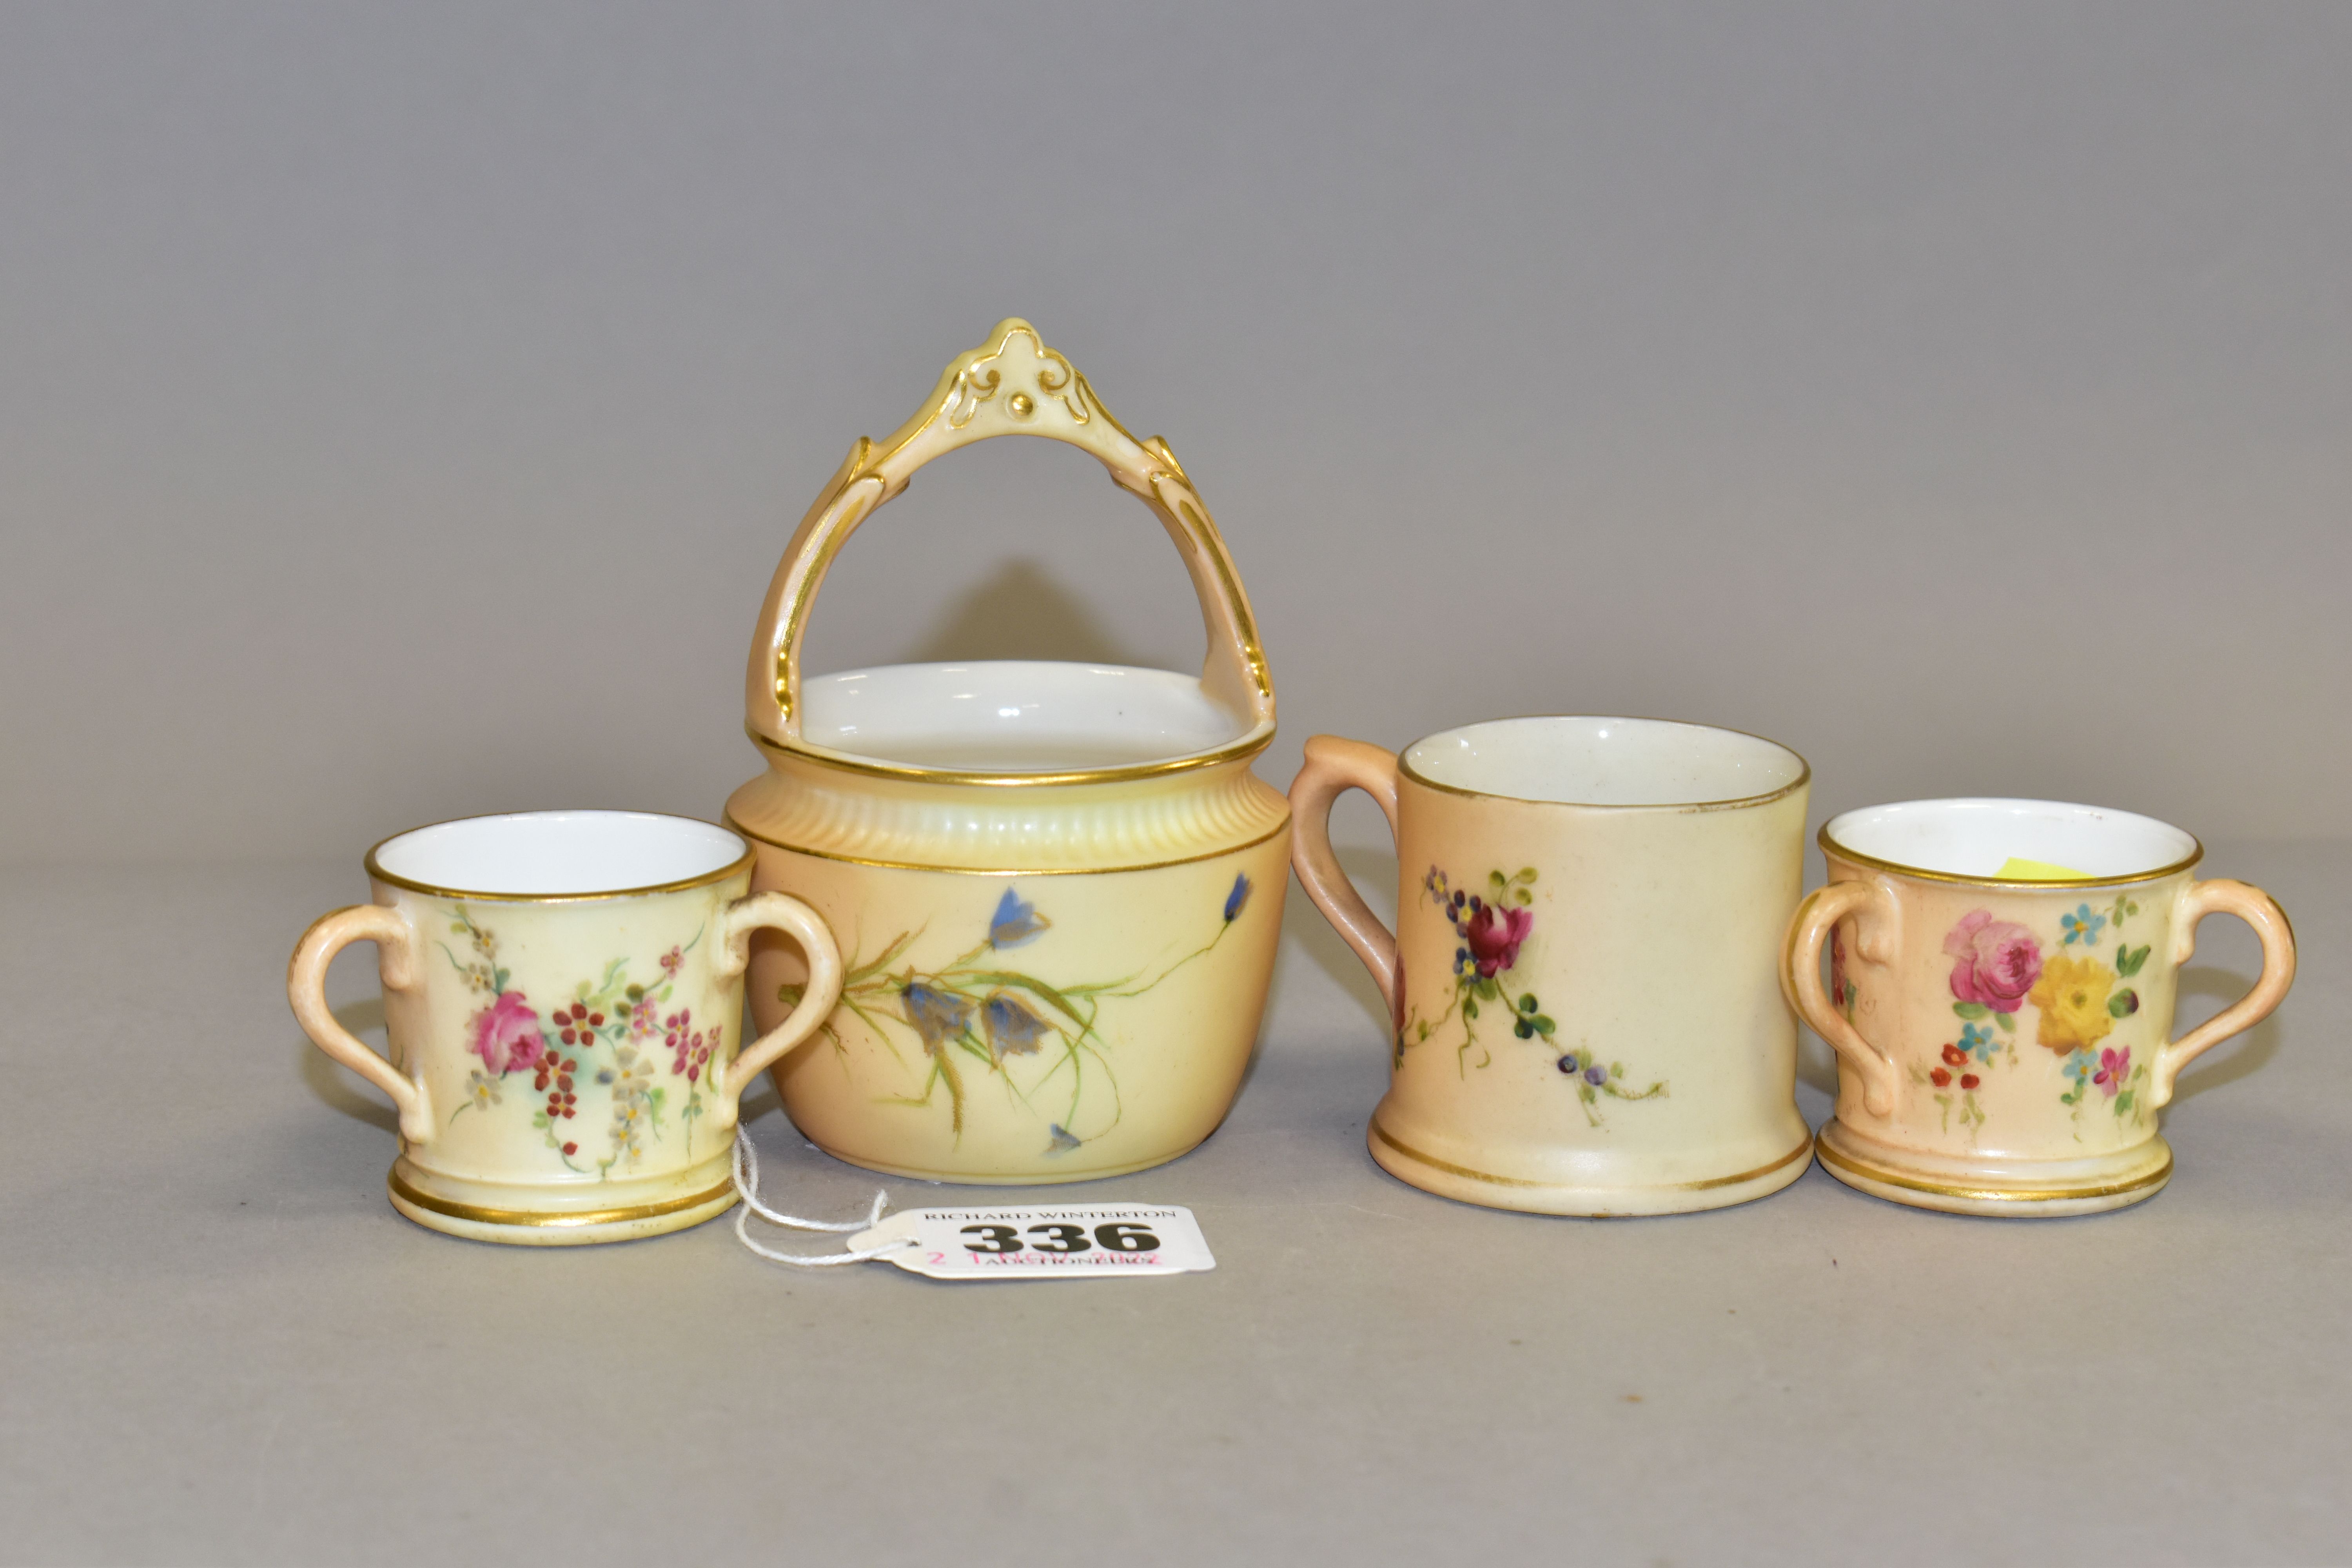 FOUR PIECES OF ROYAL WORCESTER BLUSH IVORY WARES, each printed and tinted with flowers, with green - Image 2 of 4